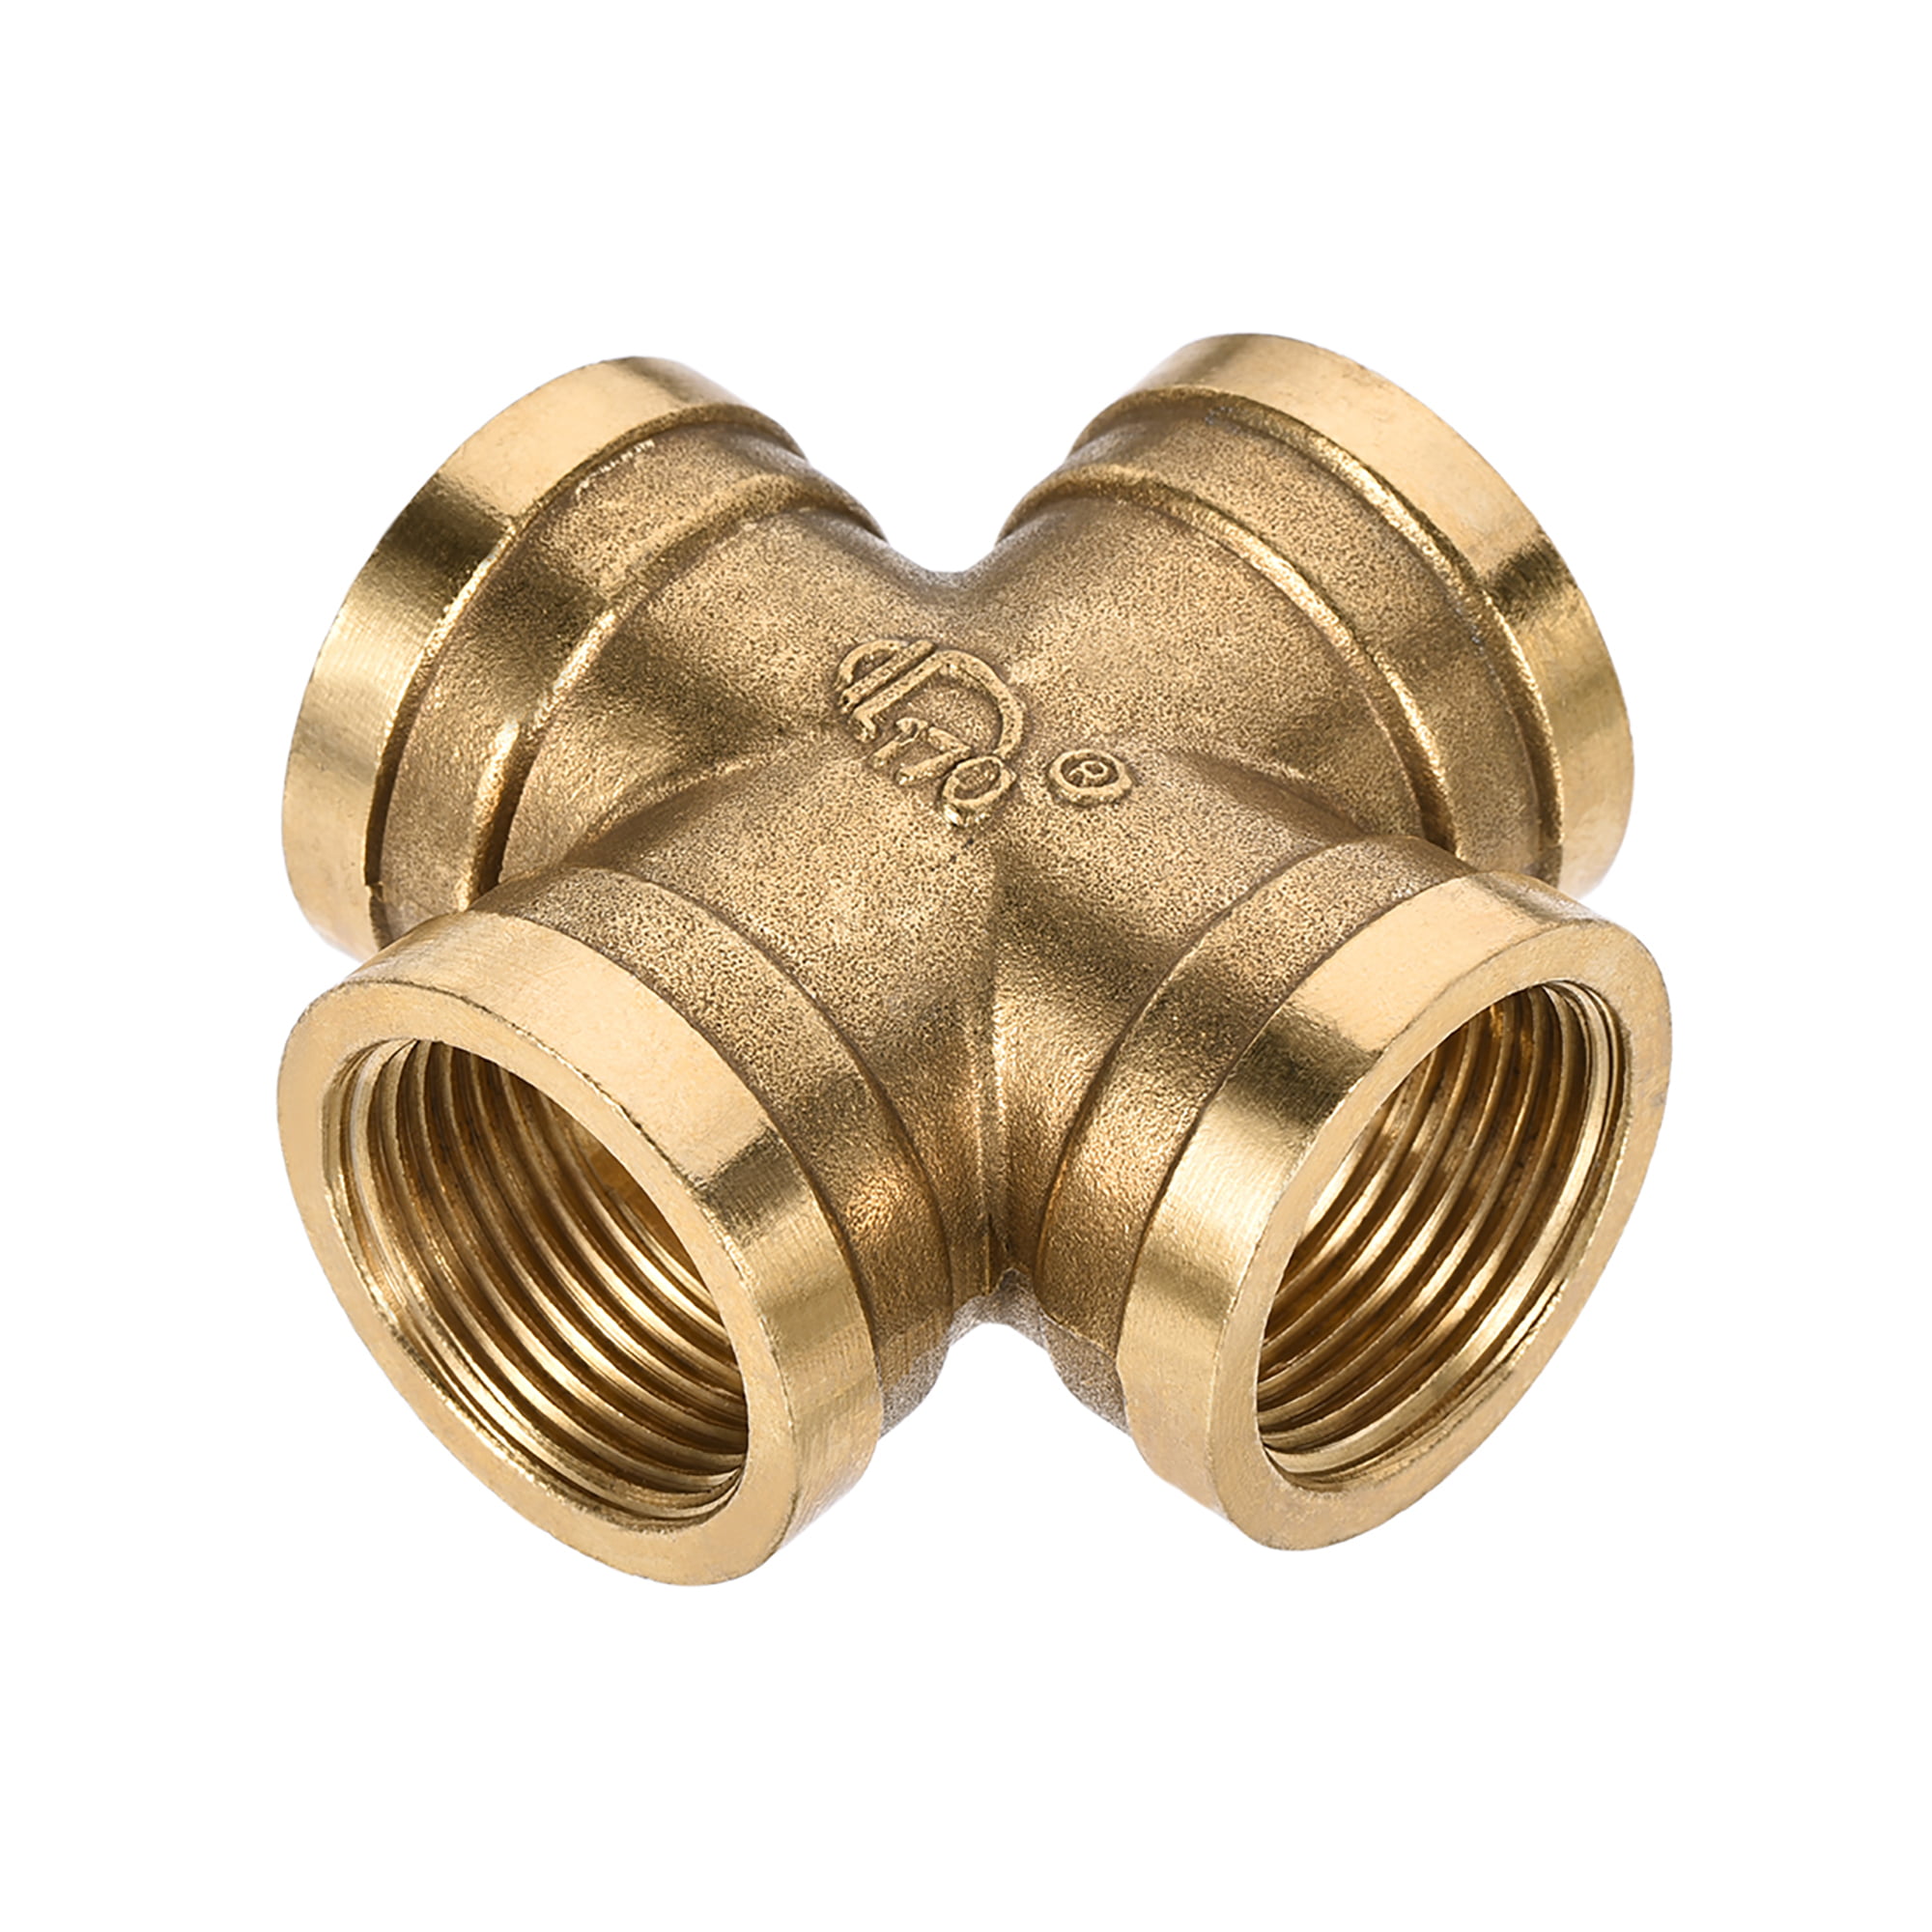 4 Way Cross BSP 1/8" Female Thread Brass Connector Fitting Pipe Adapter Thick 